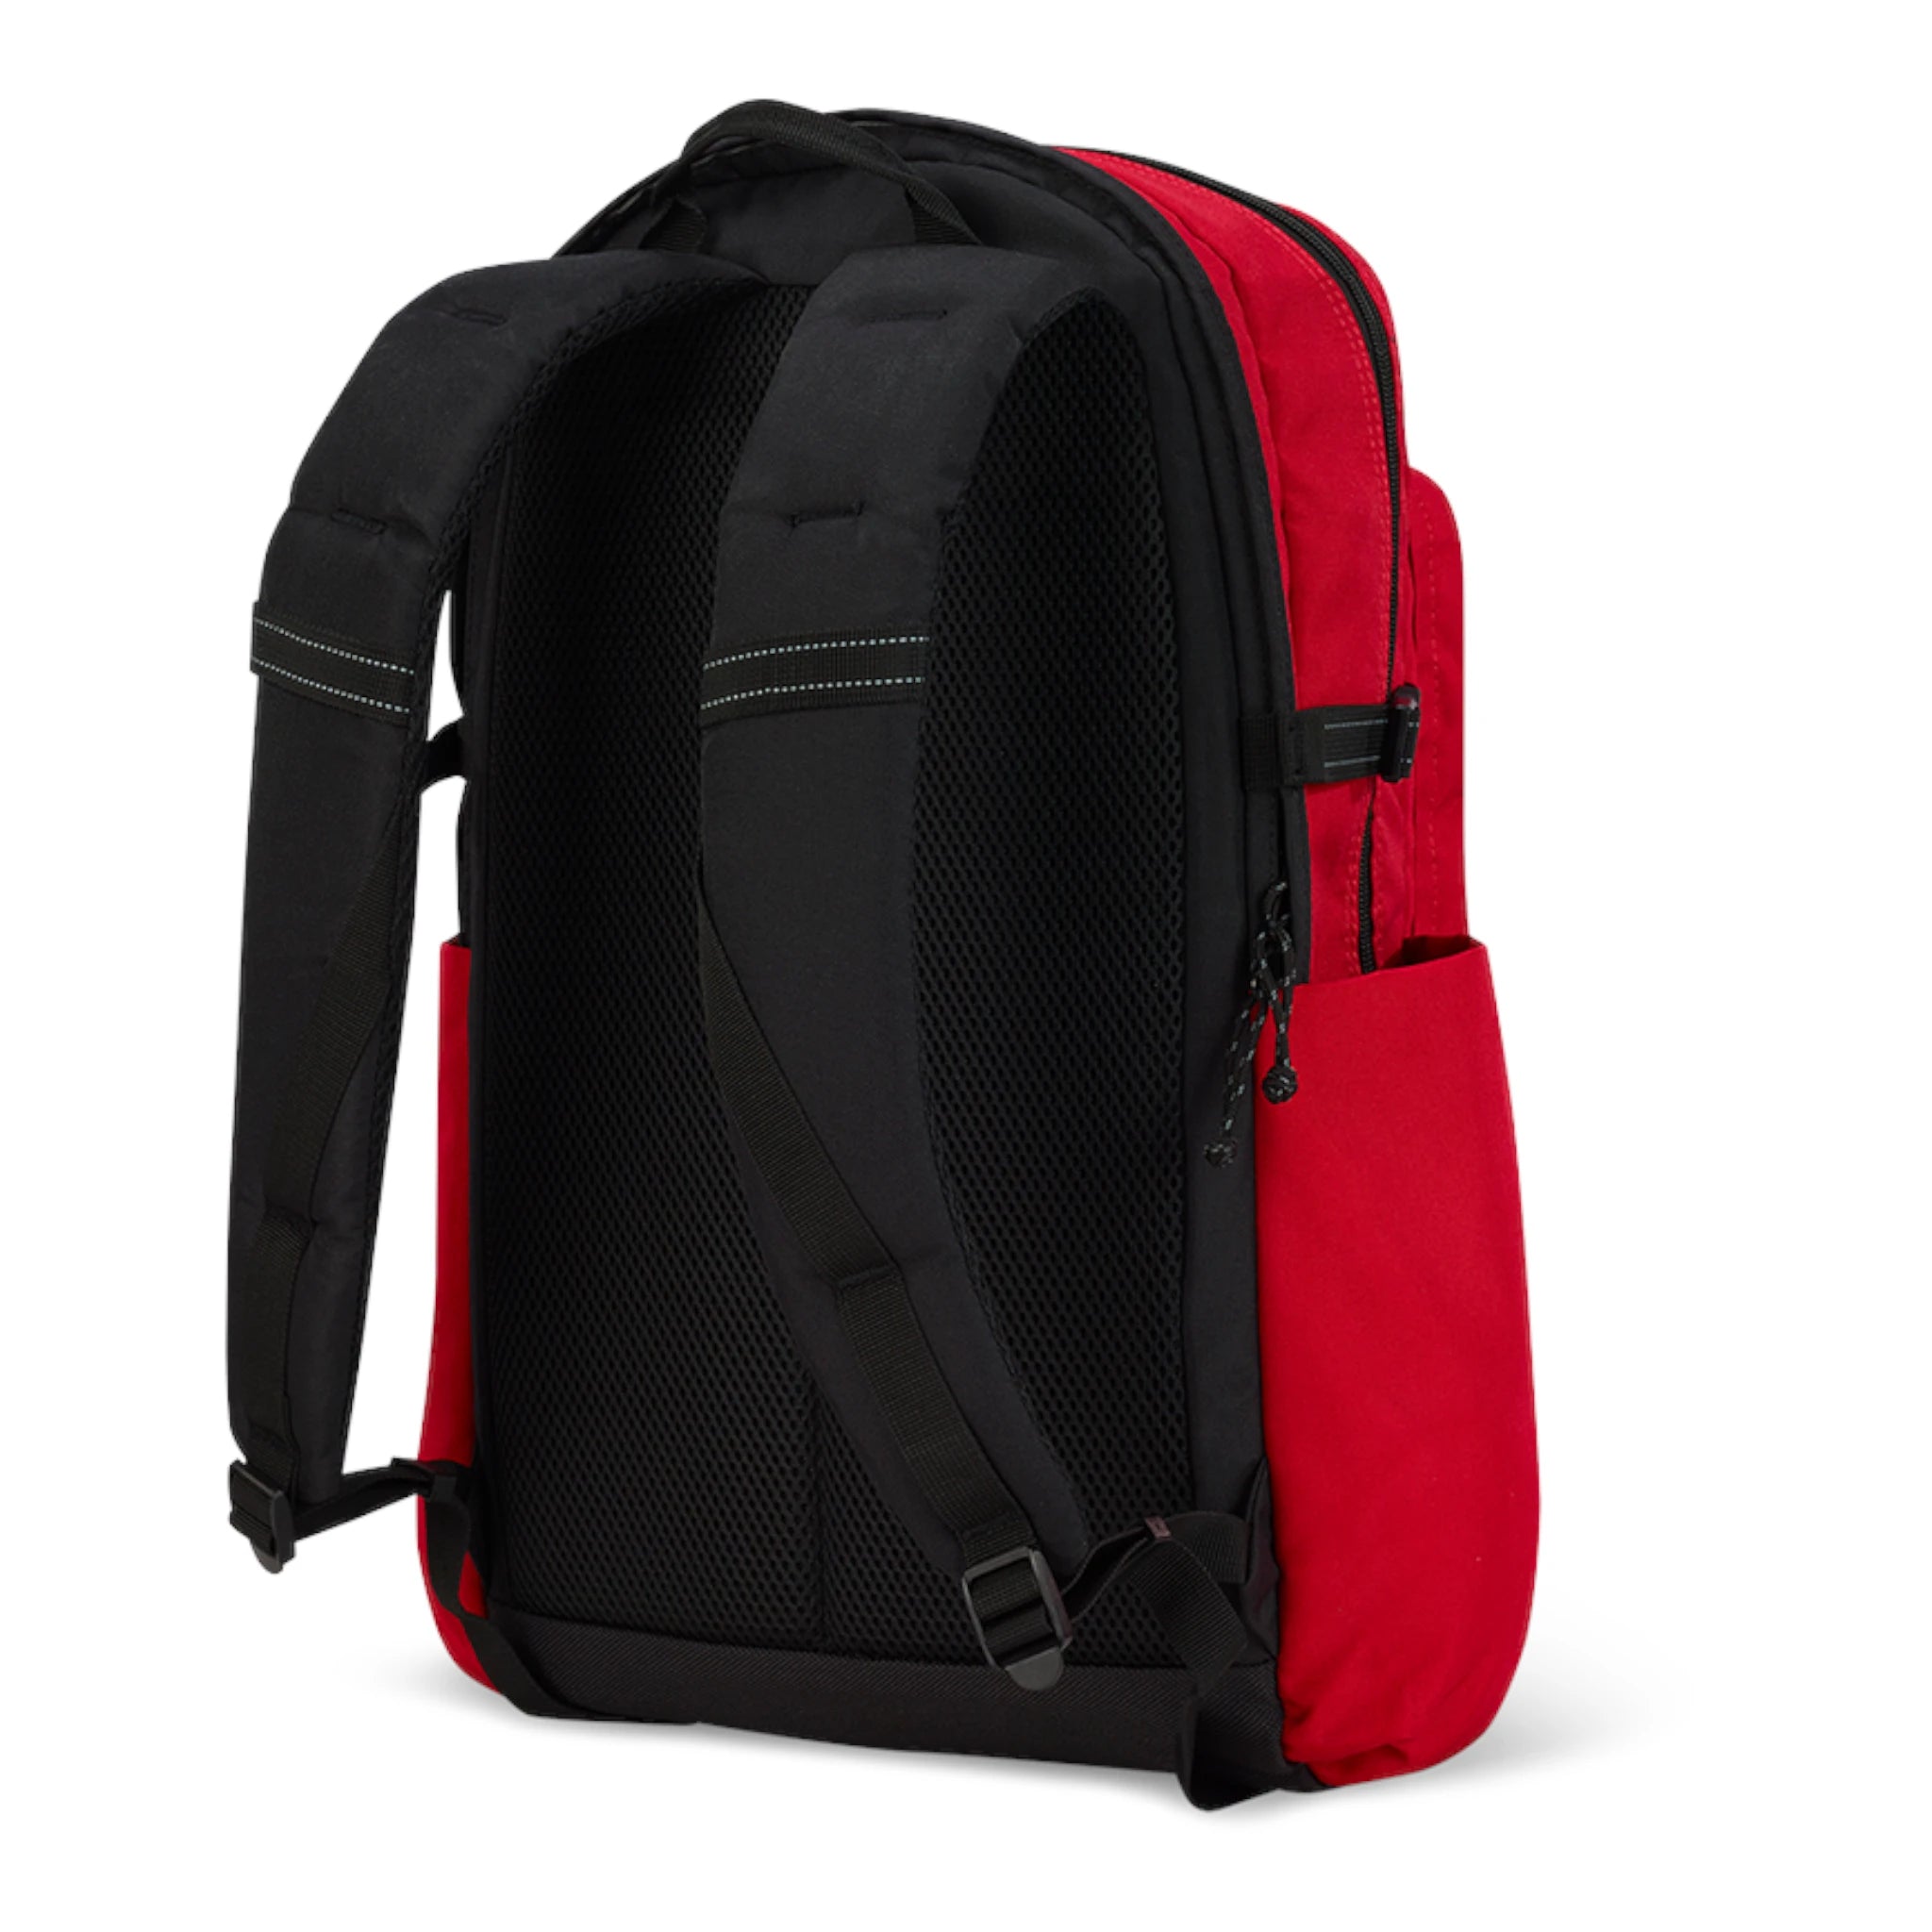 ALPHA RECON 220 BACKPACK